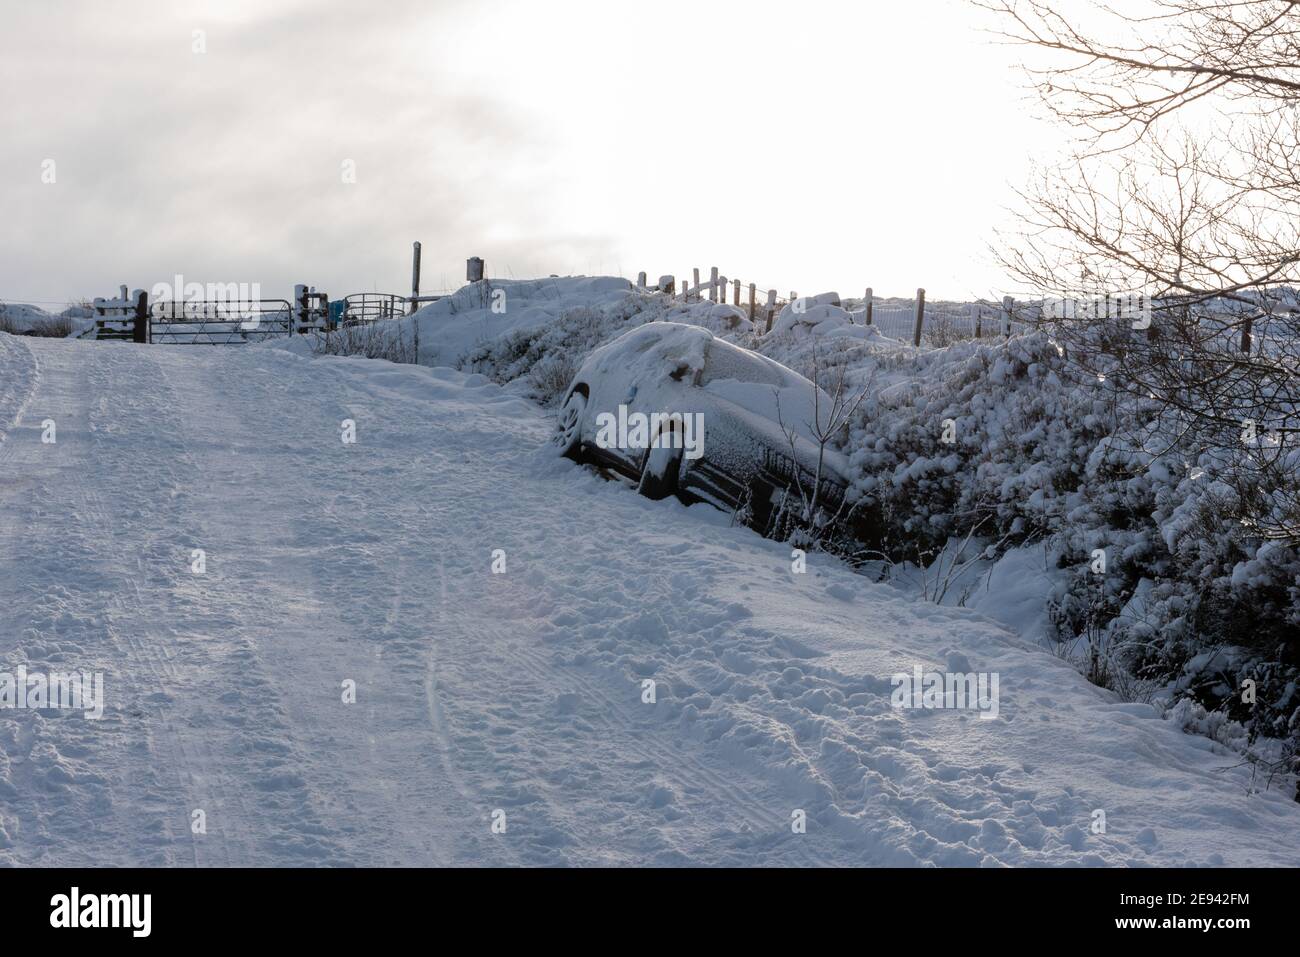 A car abound in a ditch after skidding off the road in treacherous conditions Stock Photo